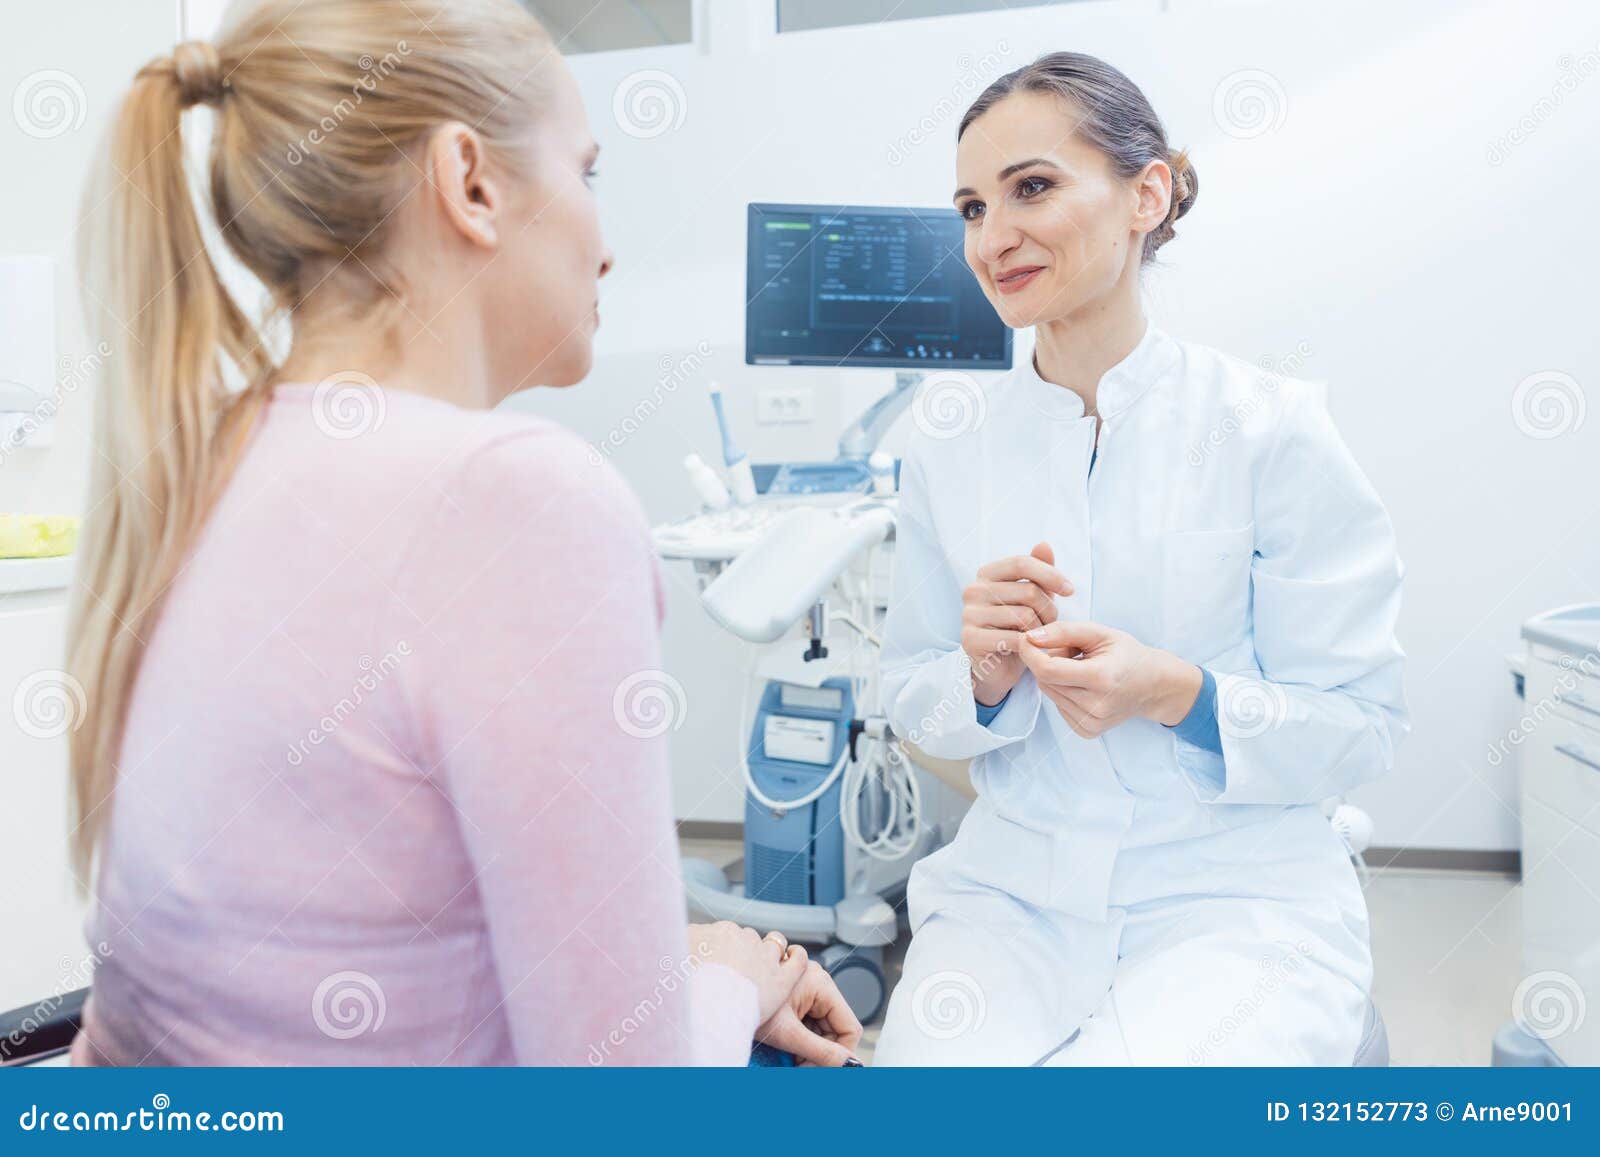 woman at the gynecology examination with doctor